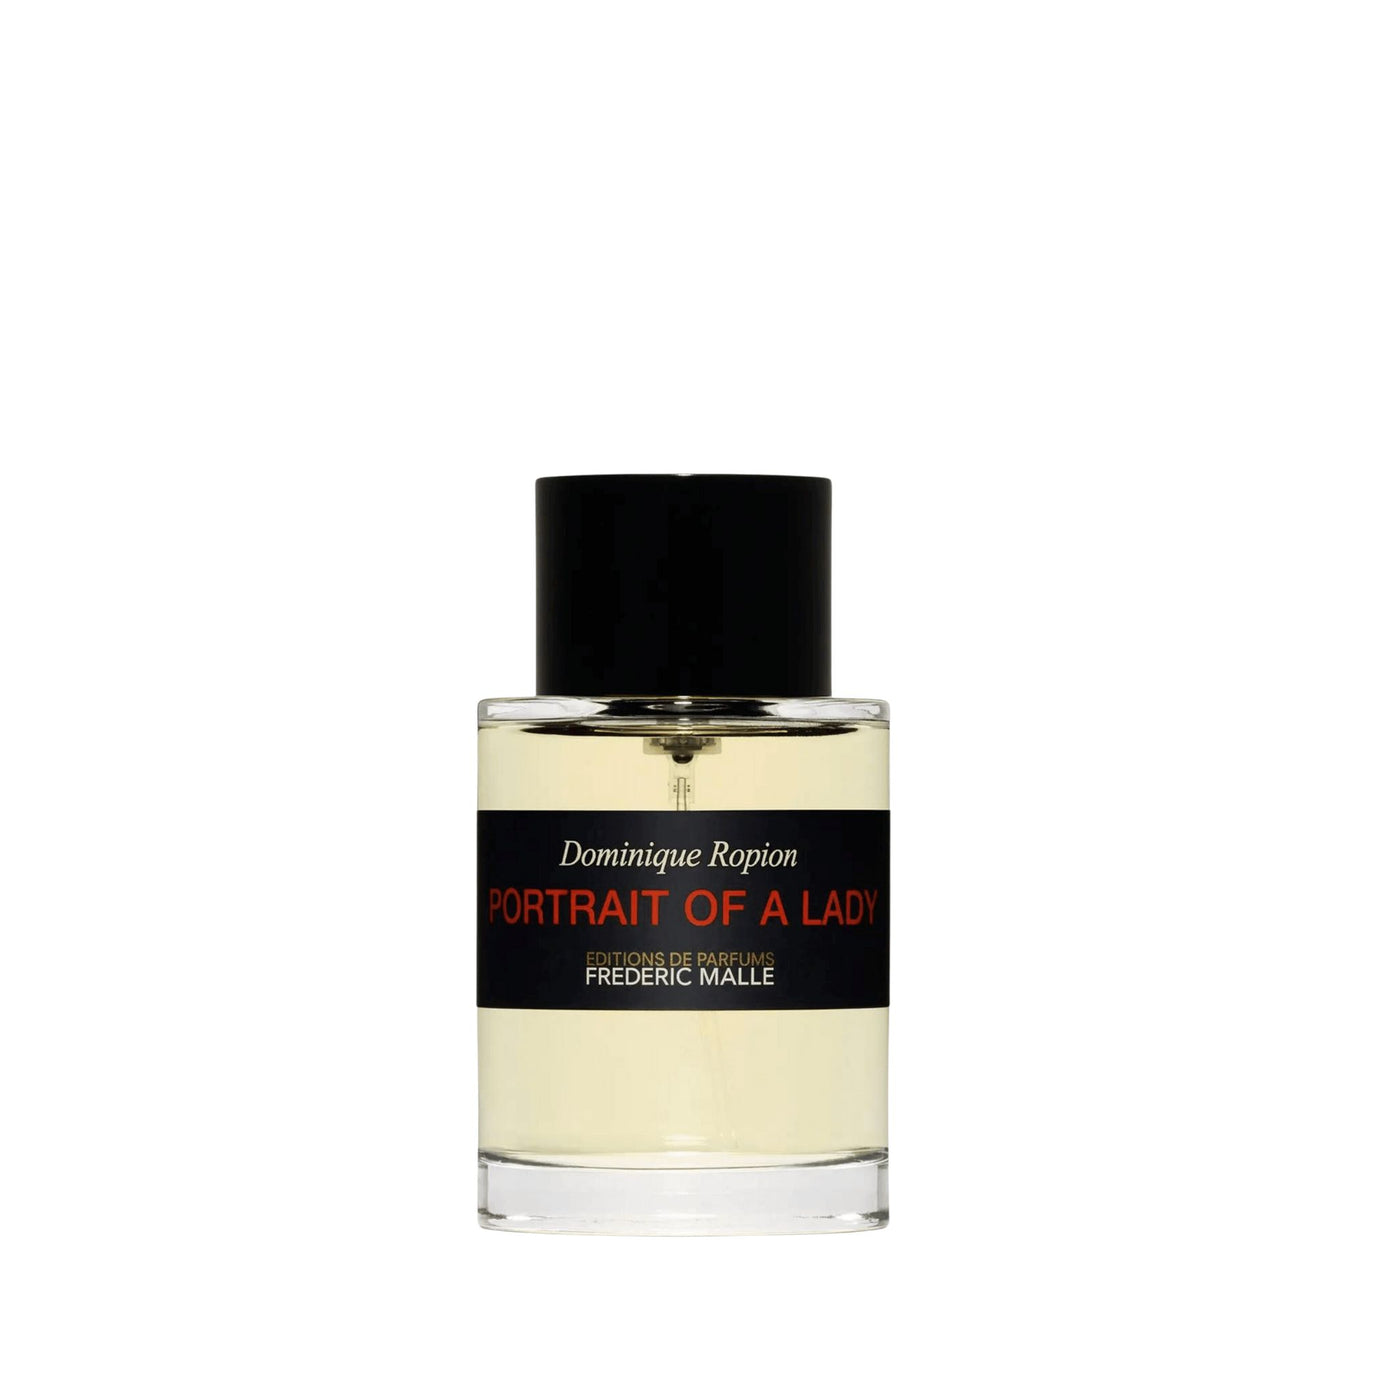 Frederic Malle Portrait of a lady